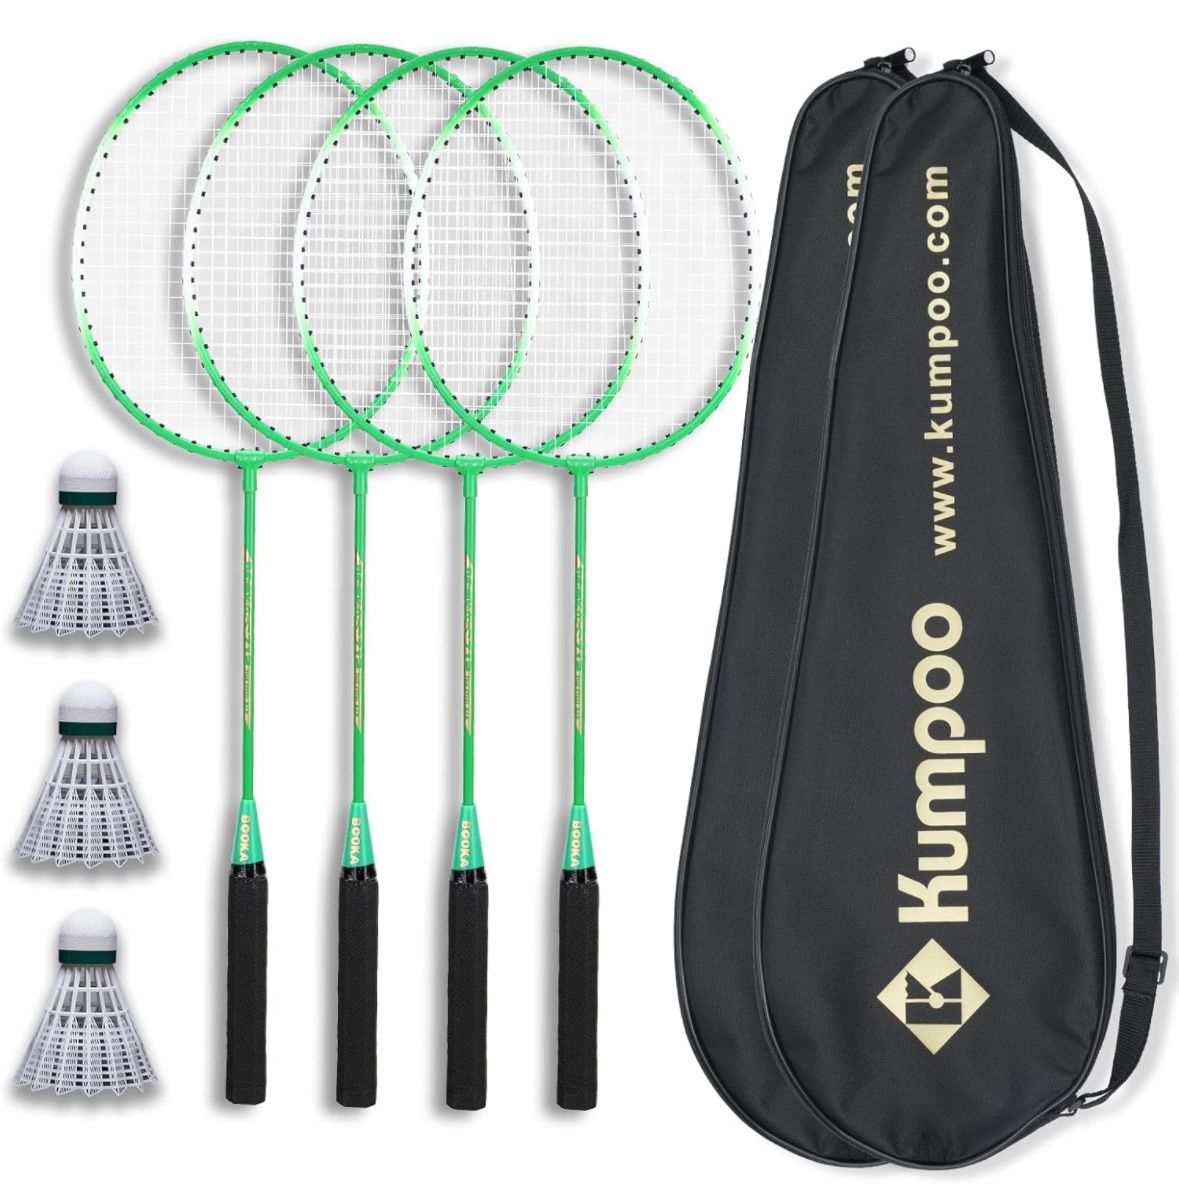 Badminton Rackets Set of 4 - Lightweight Badminton Racquet for Backyards, Gym, and Home